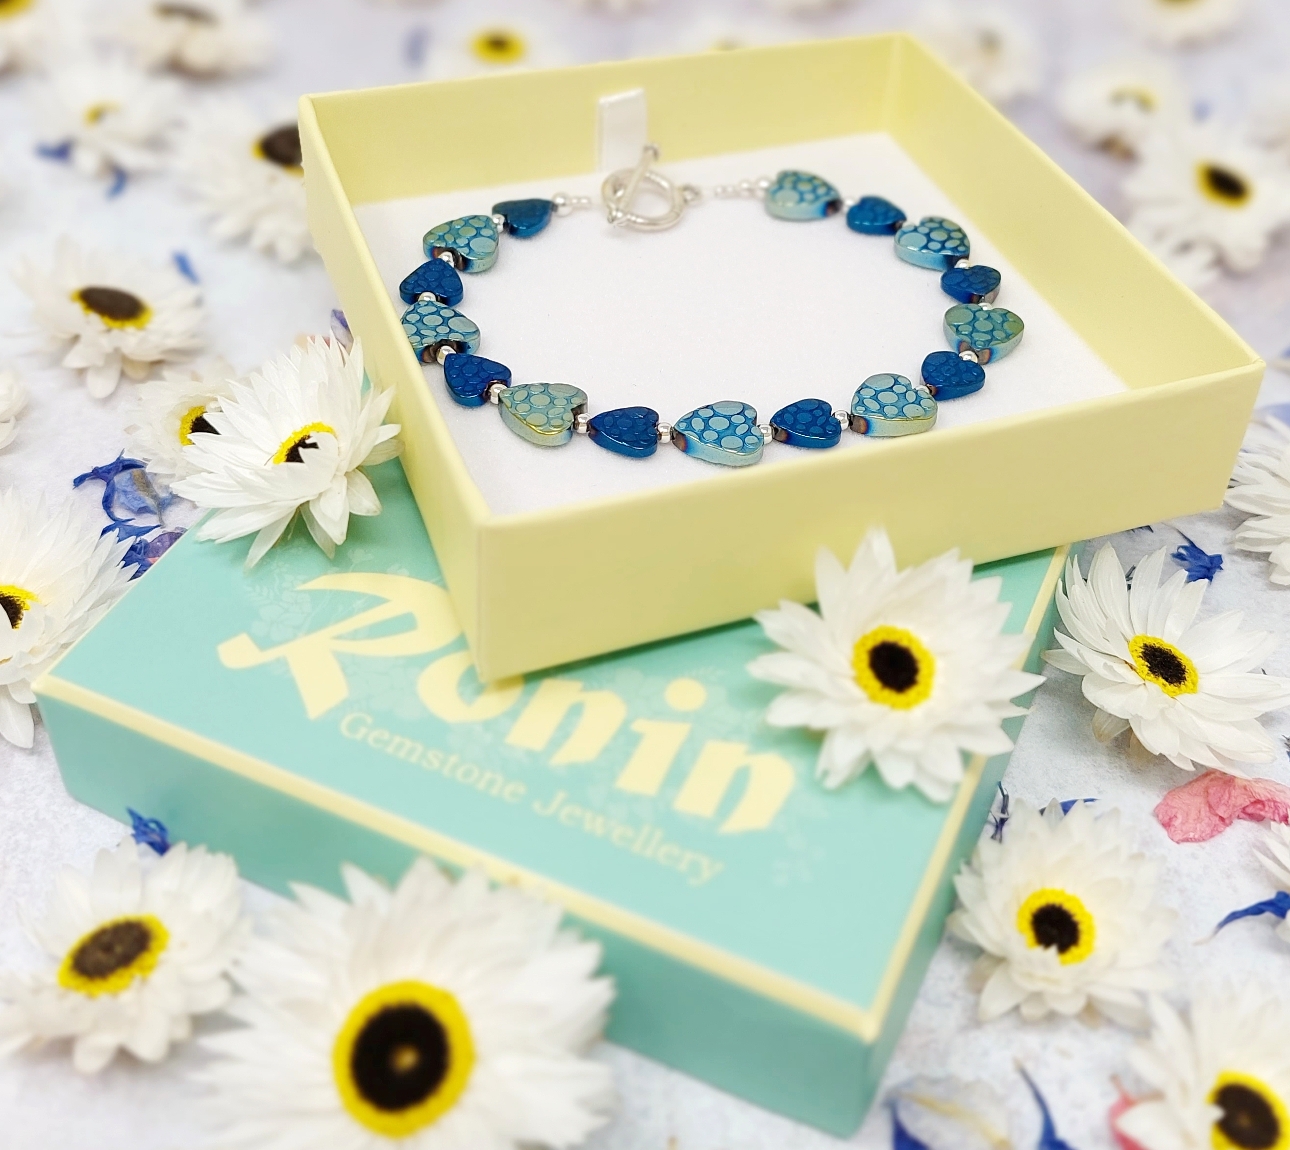 blue heart and silver bracelet in yellow gift box